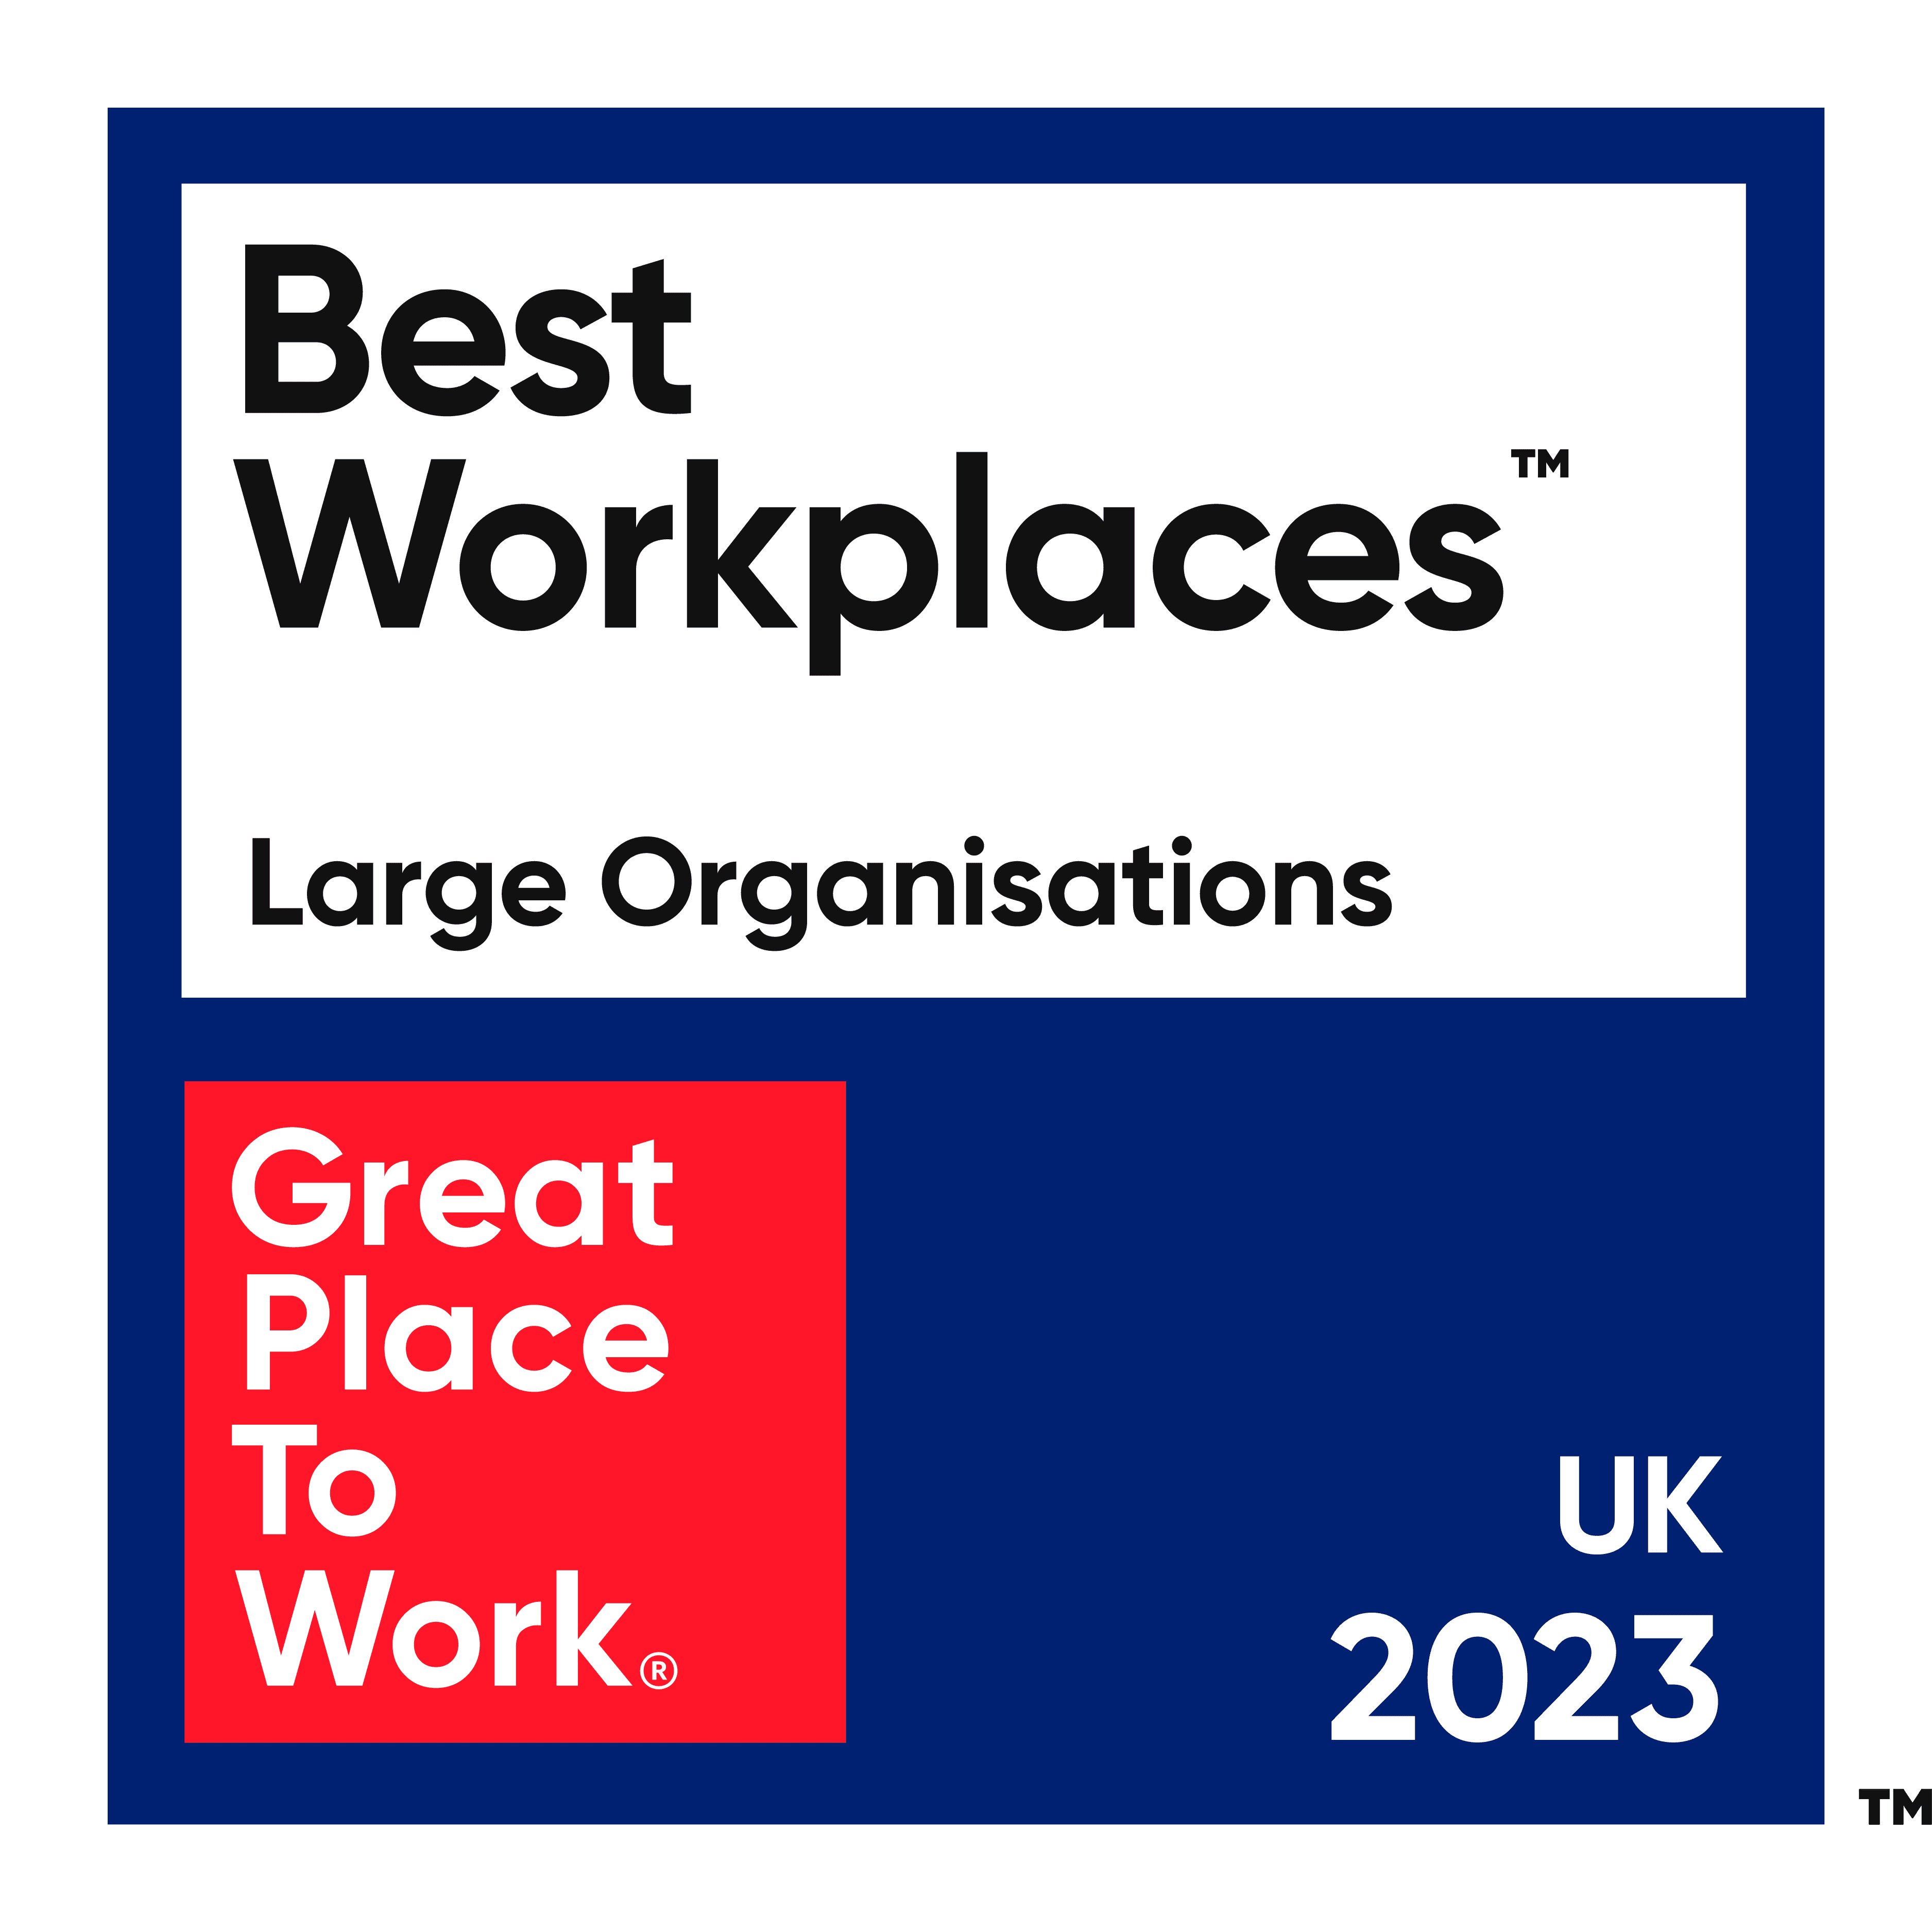 Best Workplaces UK 2023